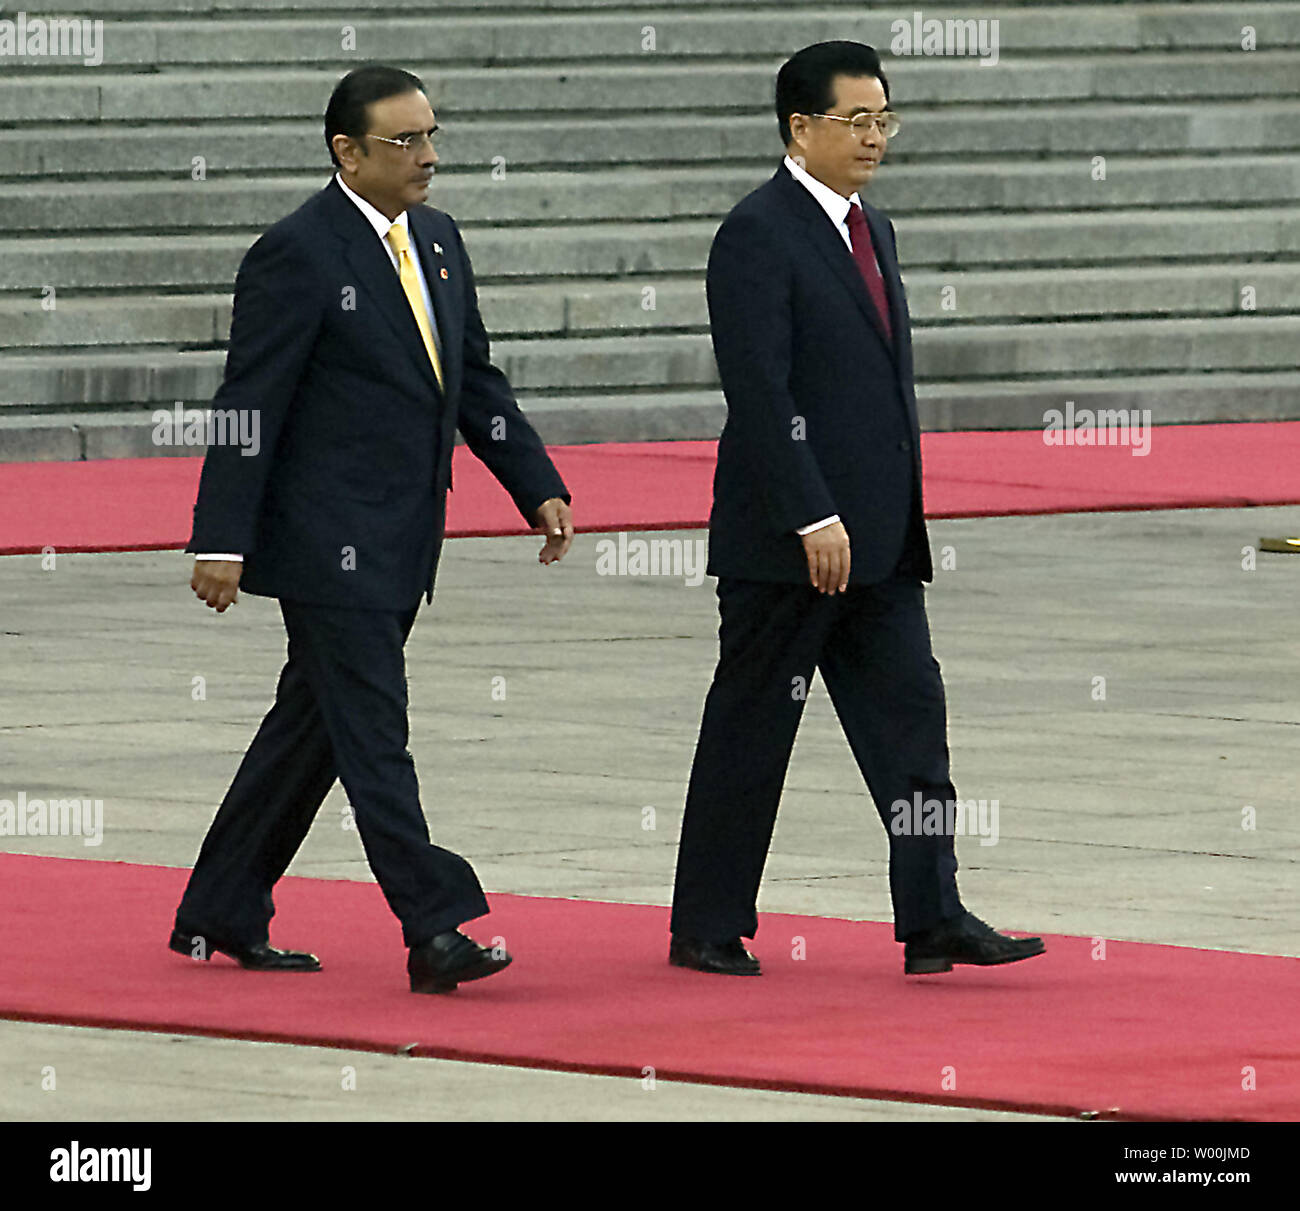 Chinese President Hu Jintao (R) and his Pakistani counterpart Asif Ali Zardari attend an official welcoming ceremony at the Great Hall of the People in Beijing October 15, 2008. Zardari arrived on Tuesday for his first visit to China as president, and has said he wants his four-day trip 'to remind the leadership of the world how close our relationship is'. Pakistan is set to usher in a series of agreements with China during the trip, highlighting Islamabad's hopes that Beijing will help it through economic and diplomatic troubles. (UPI Photo/Stephen Shaver) Stock Photo